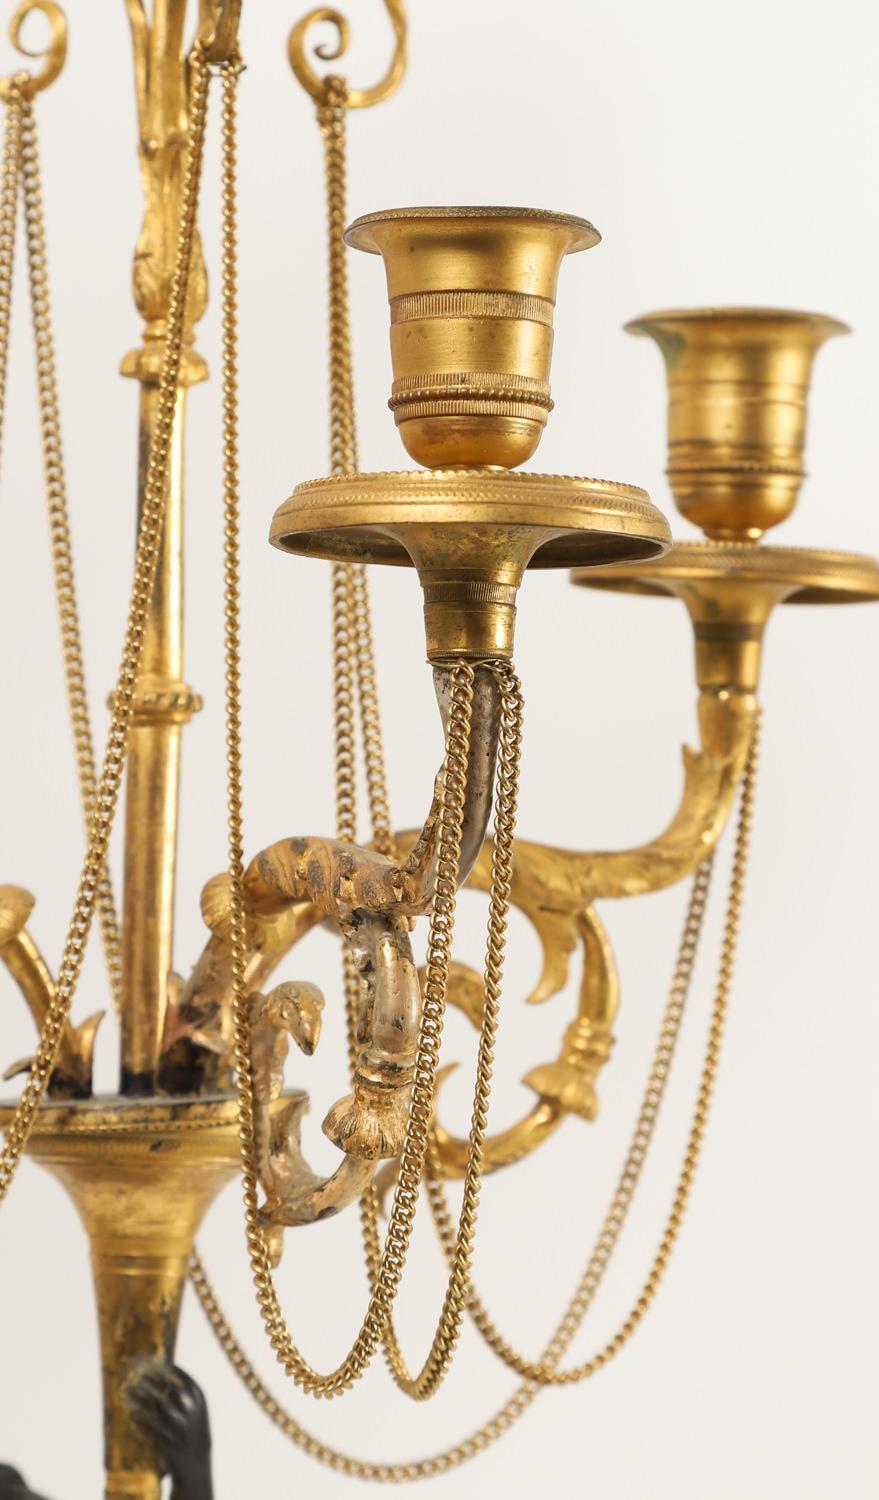 Late 18th Century Pair of Neoclassical Directoire Gilt and Patinated Bronze Figural Candelabras For Sale